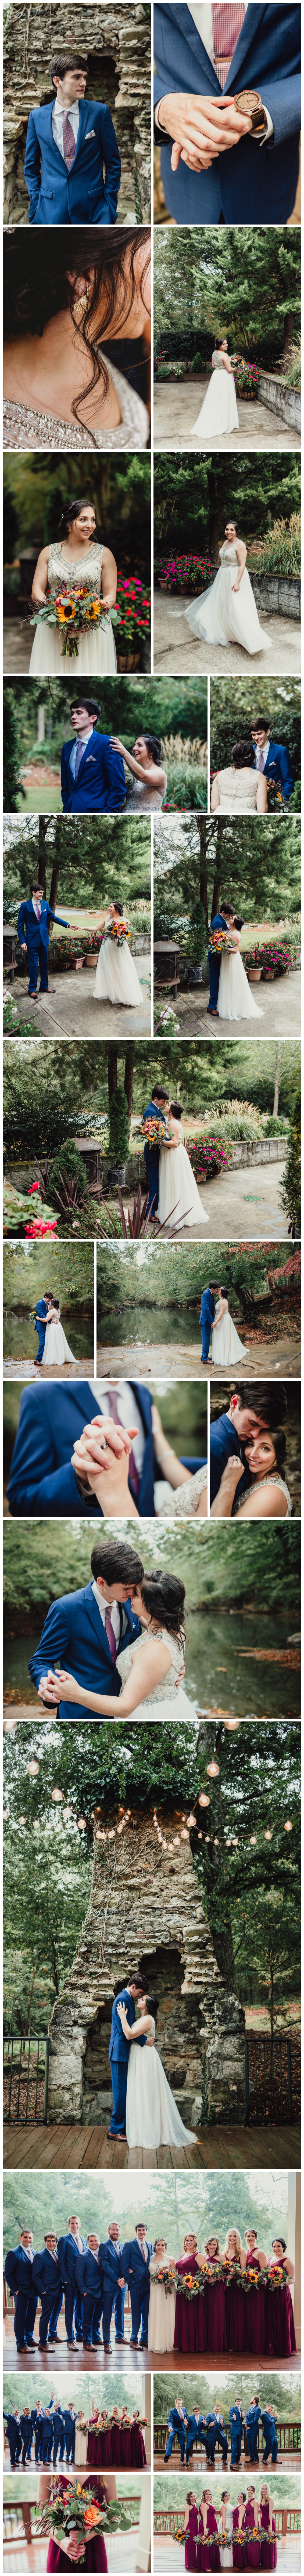 Christine Quarte Photography - First Look